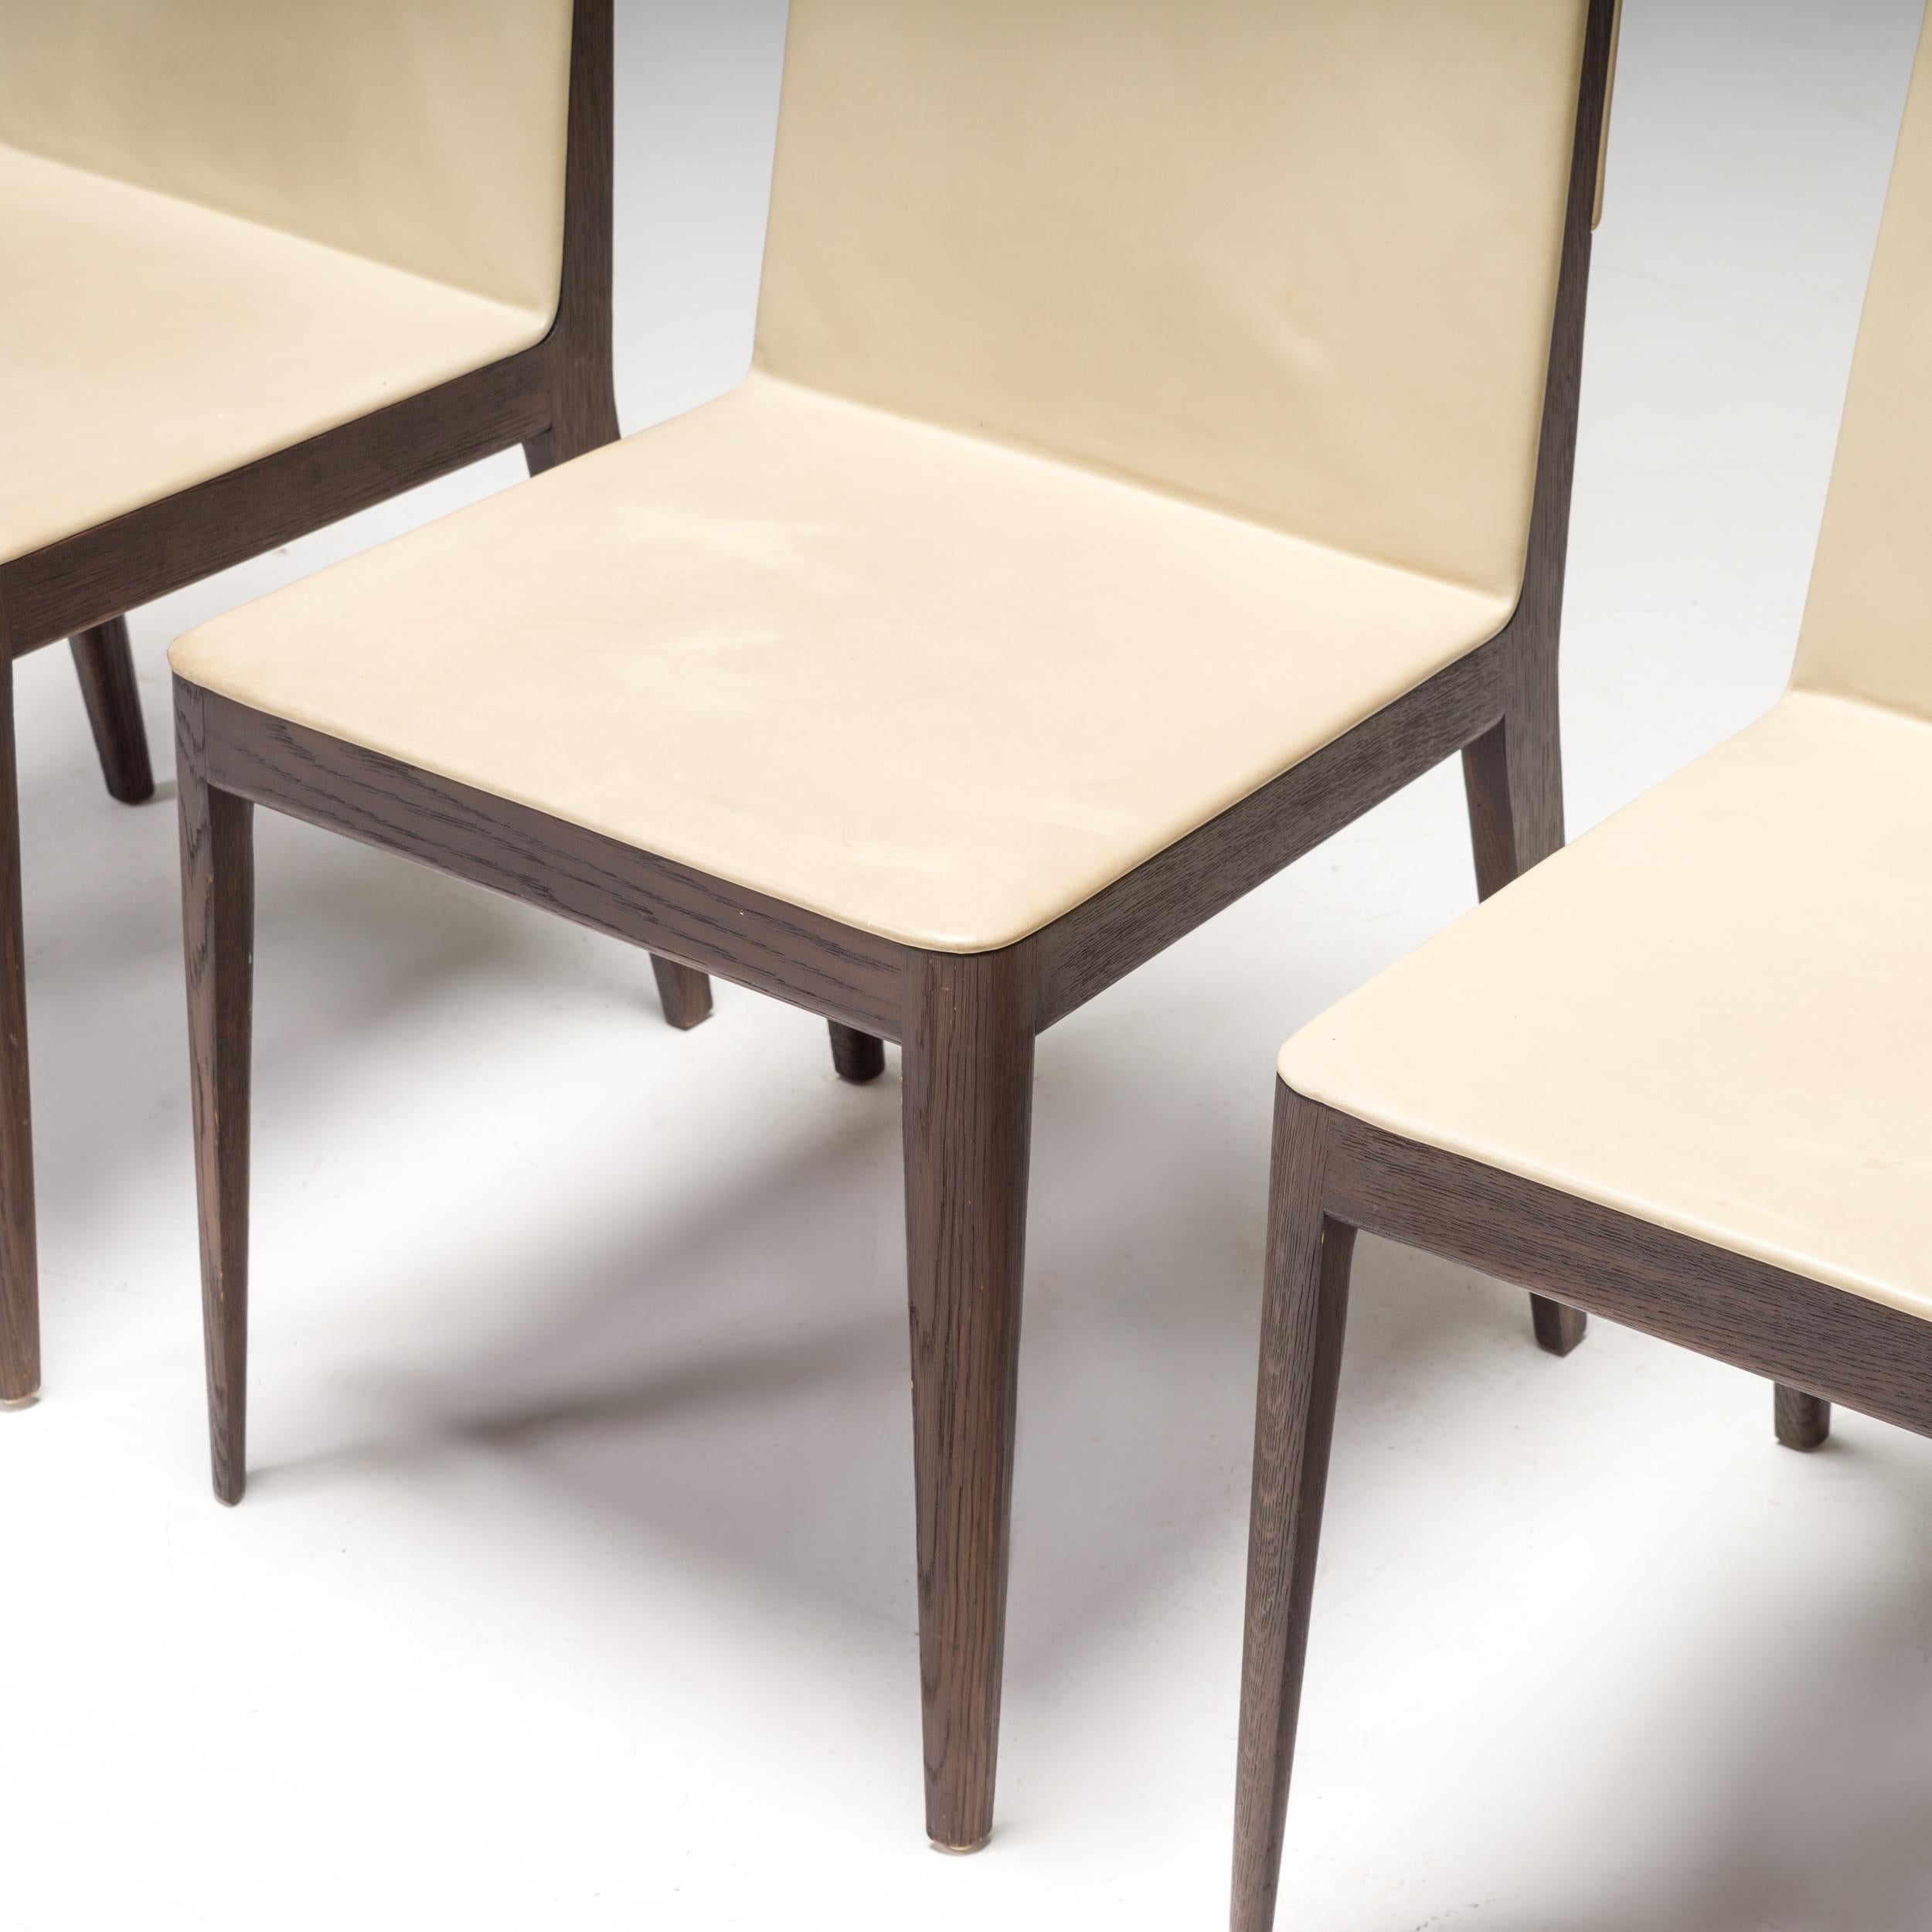 B&B Italia by Antonio Citterio Beige Leather & Walnut EL Dining Chairs, Set of 4 For Sale 2